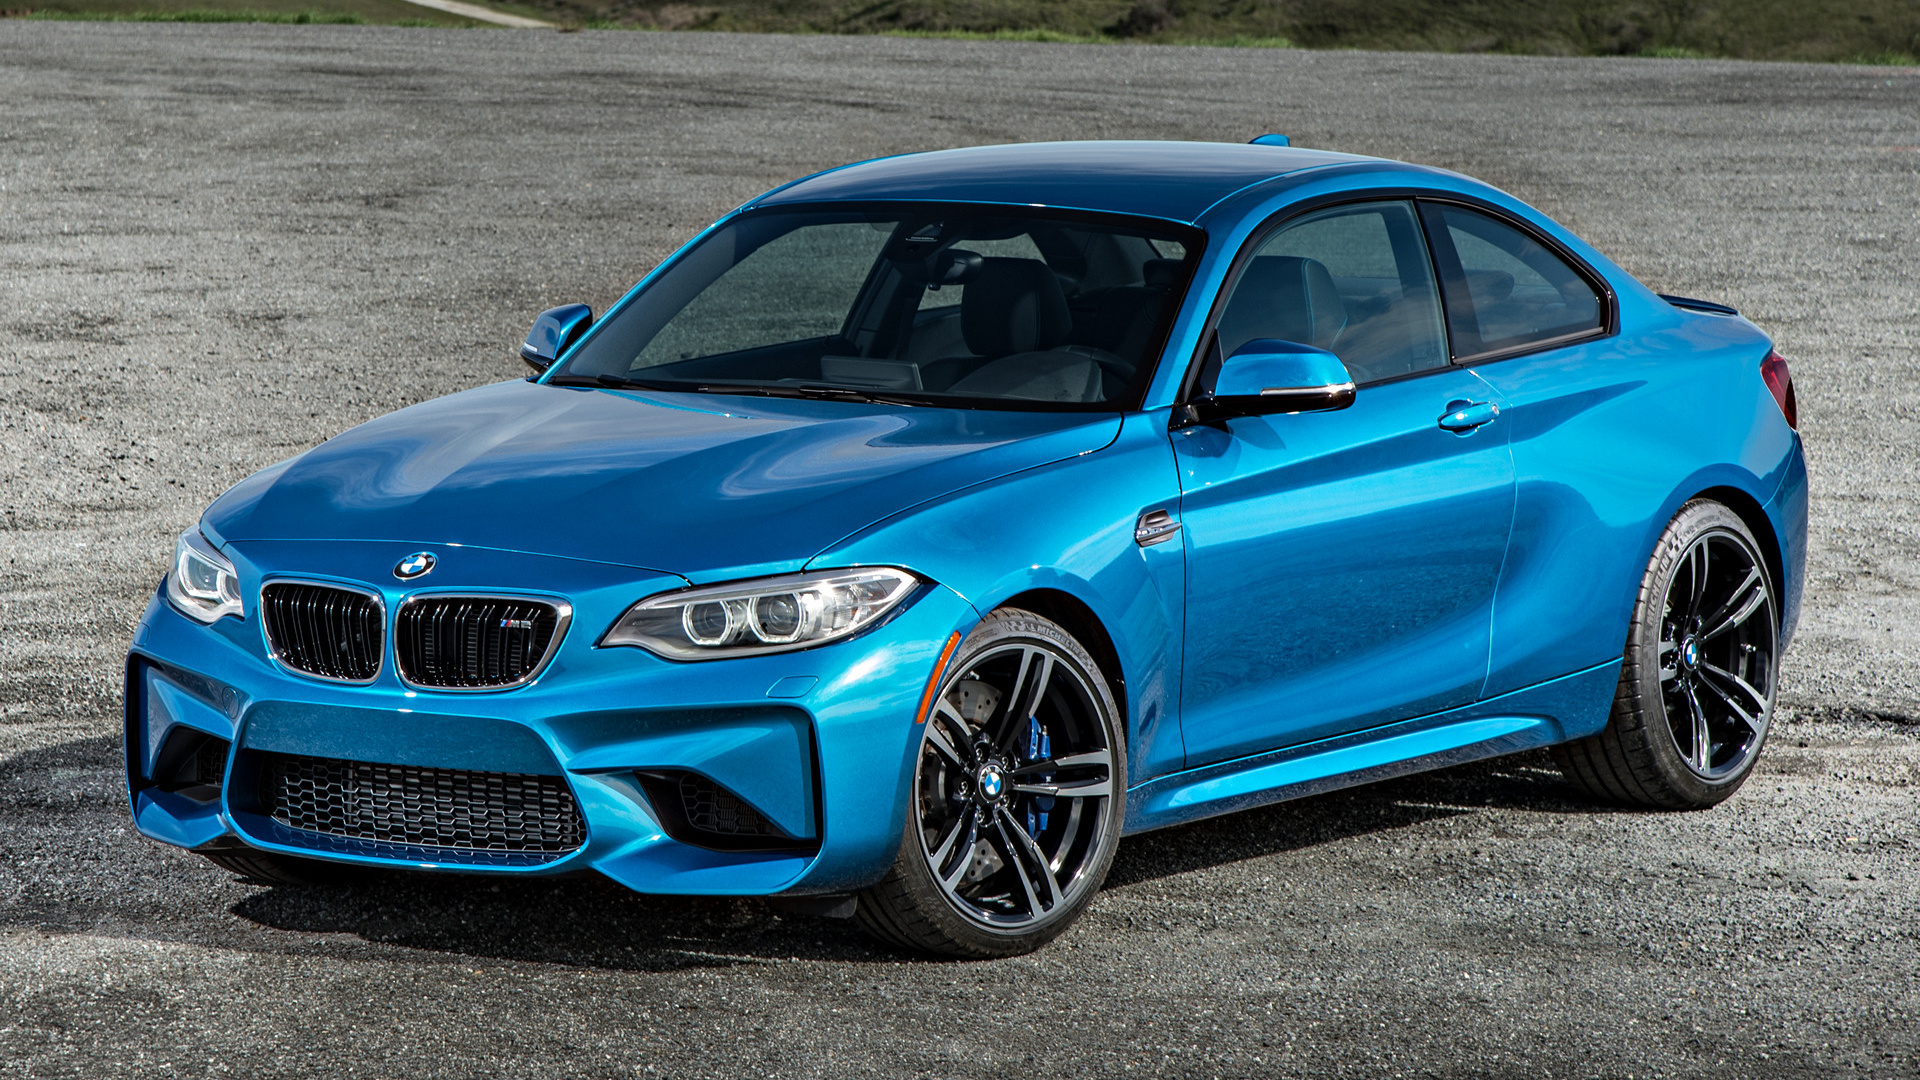 A Luxurious Take On The Iconic M Series: The 2016 BMW M2 Coupe